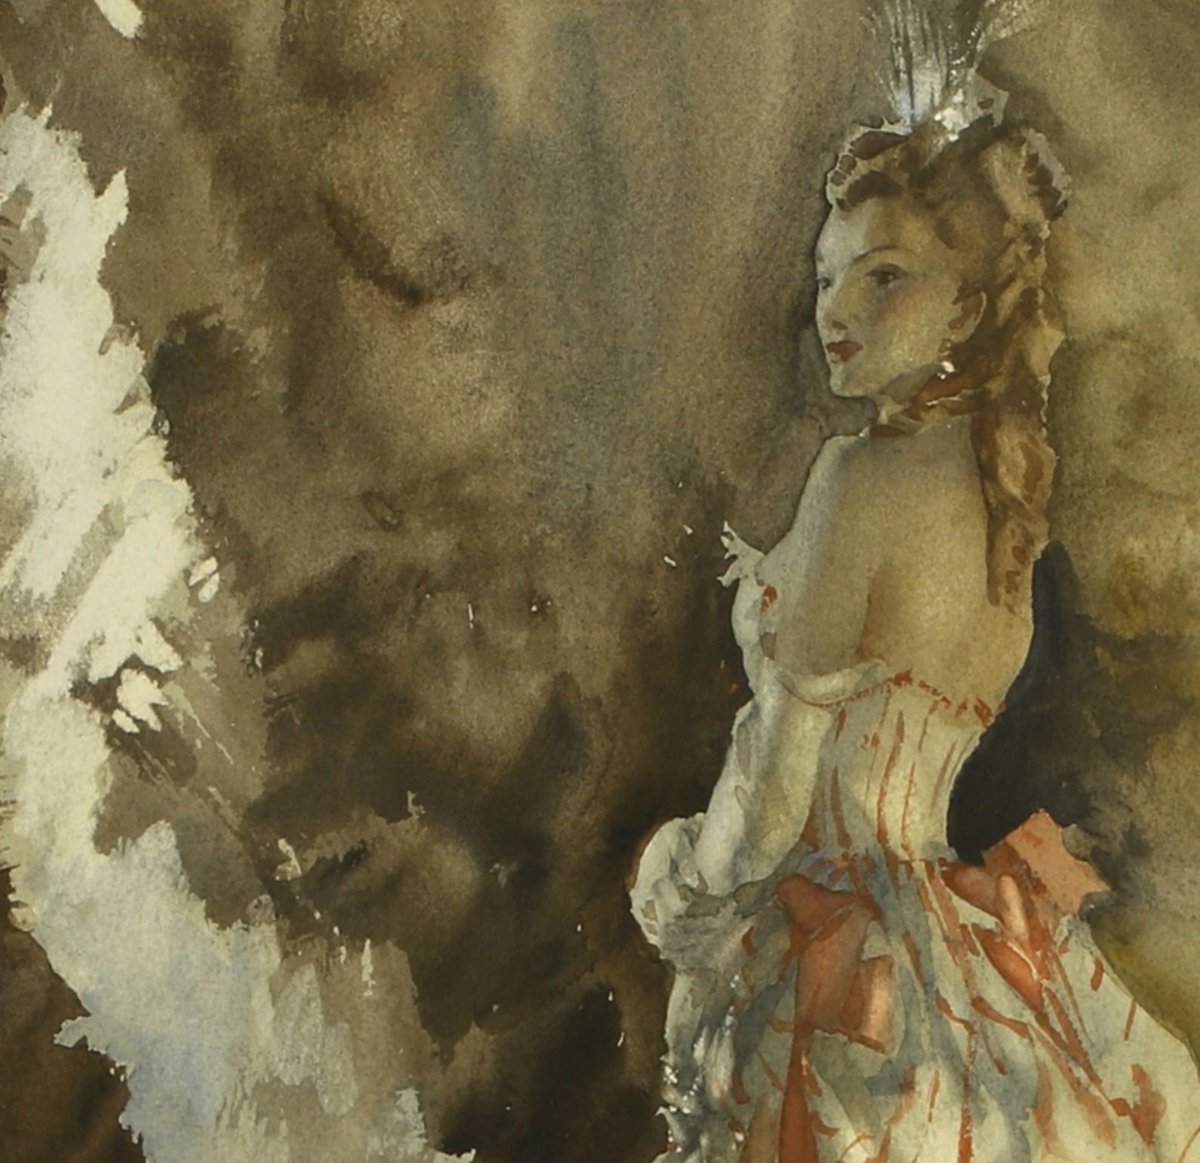 Detail from 'Curtain Call' by Sir William Russell Flint RA ROI (1880-1969) Signed 'W. Russell Flint' lower right Watercolour, 16 x 12 inches #SirWilliamRussellFlint #williamrussellFlint #flint #watercolour